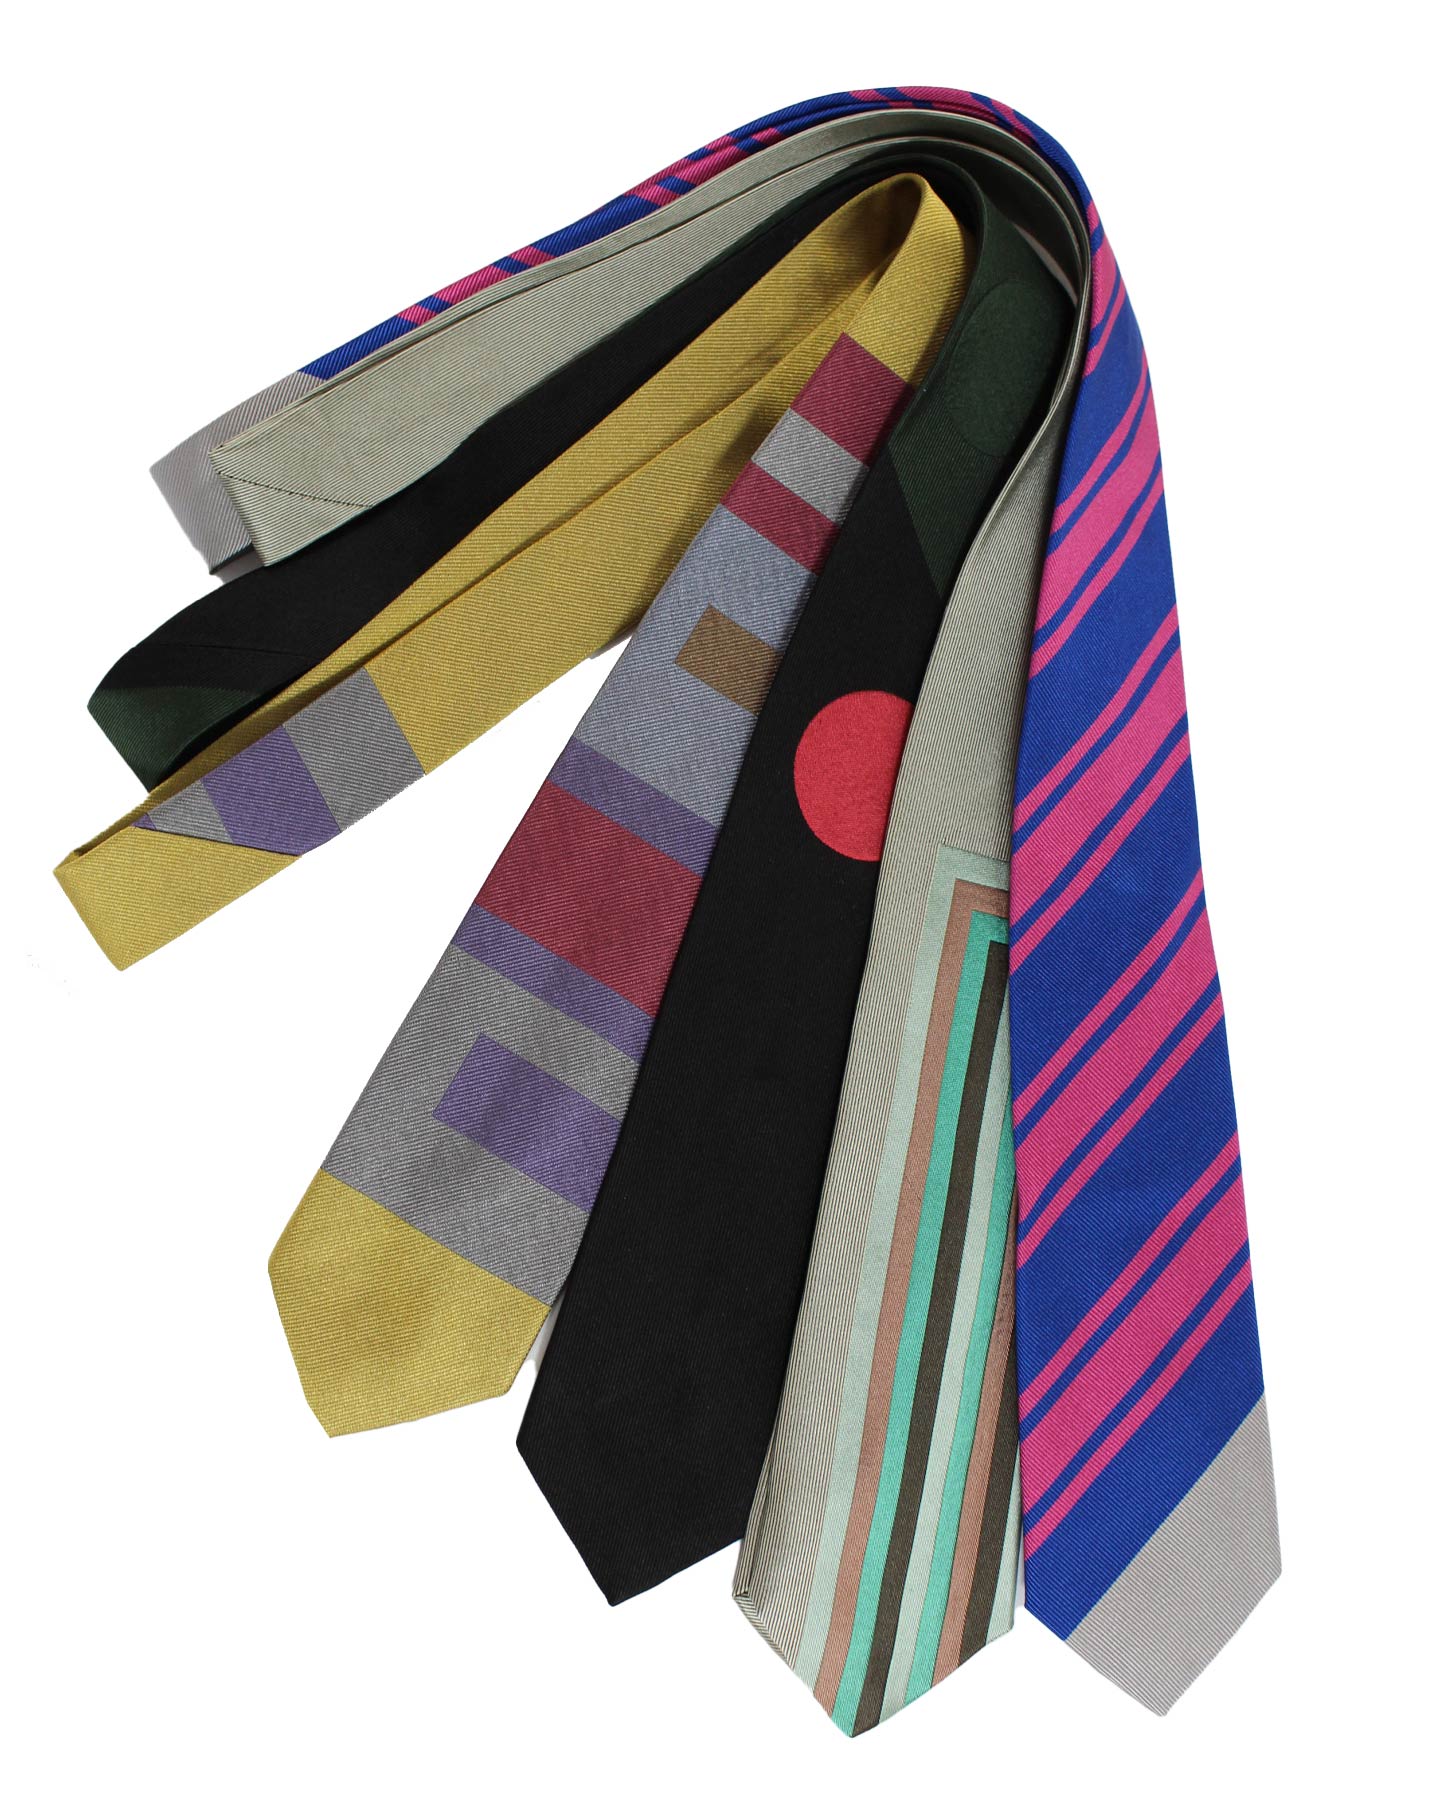 Discount set of 4 cool ties at a great price